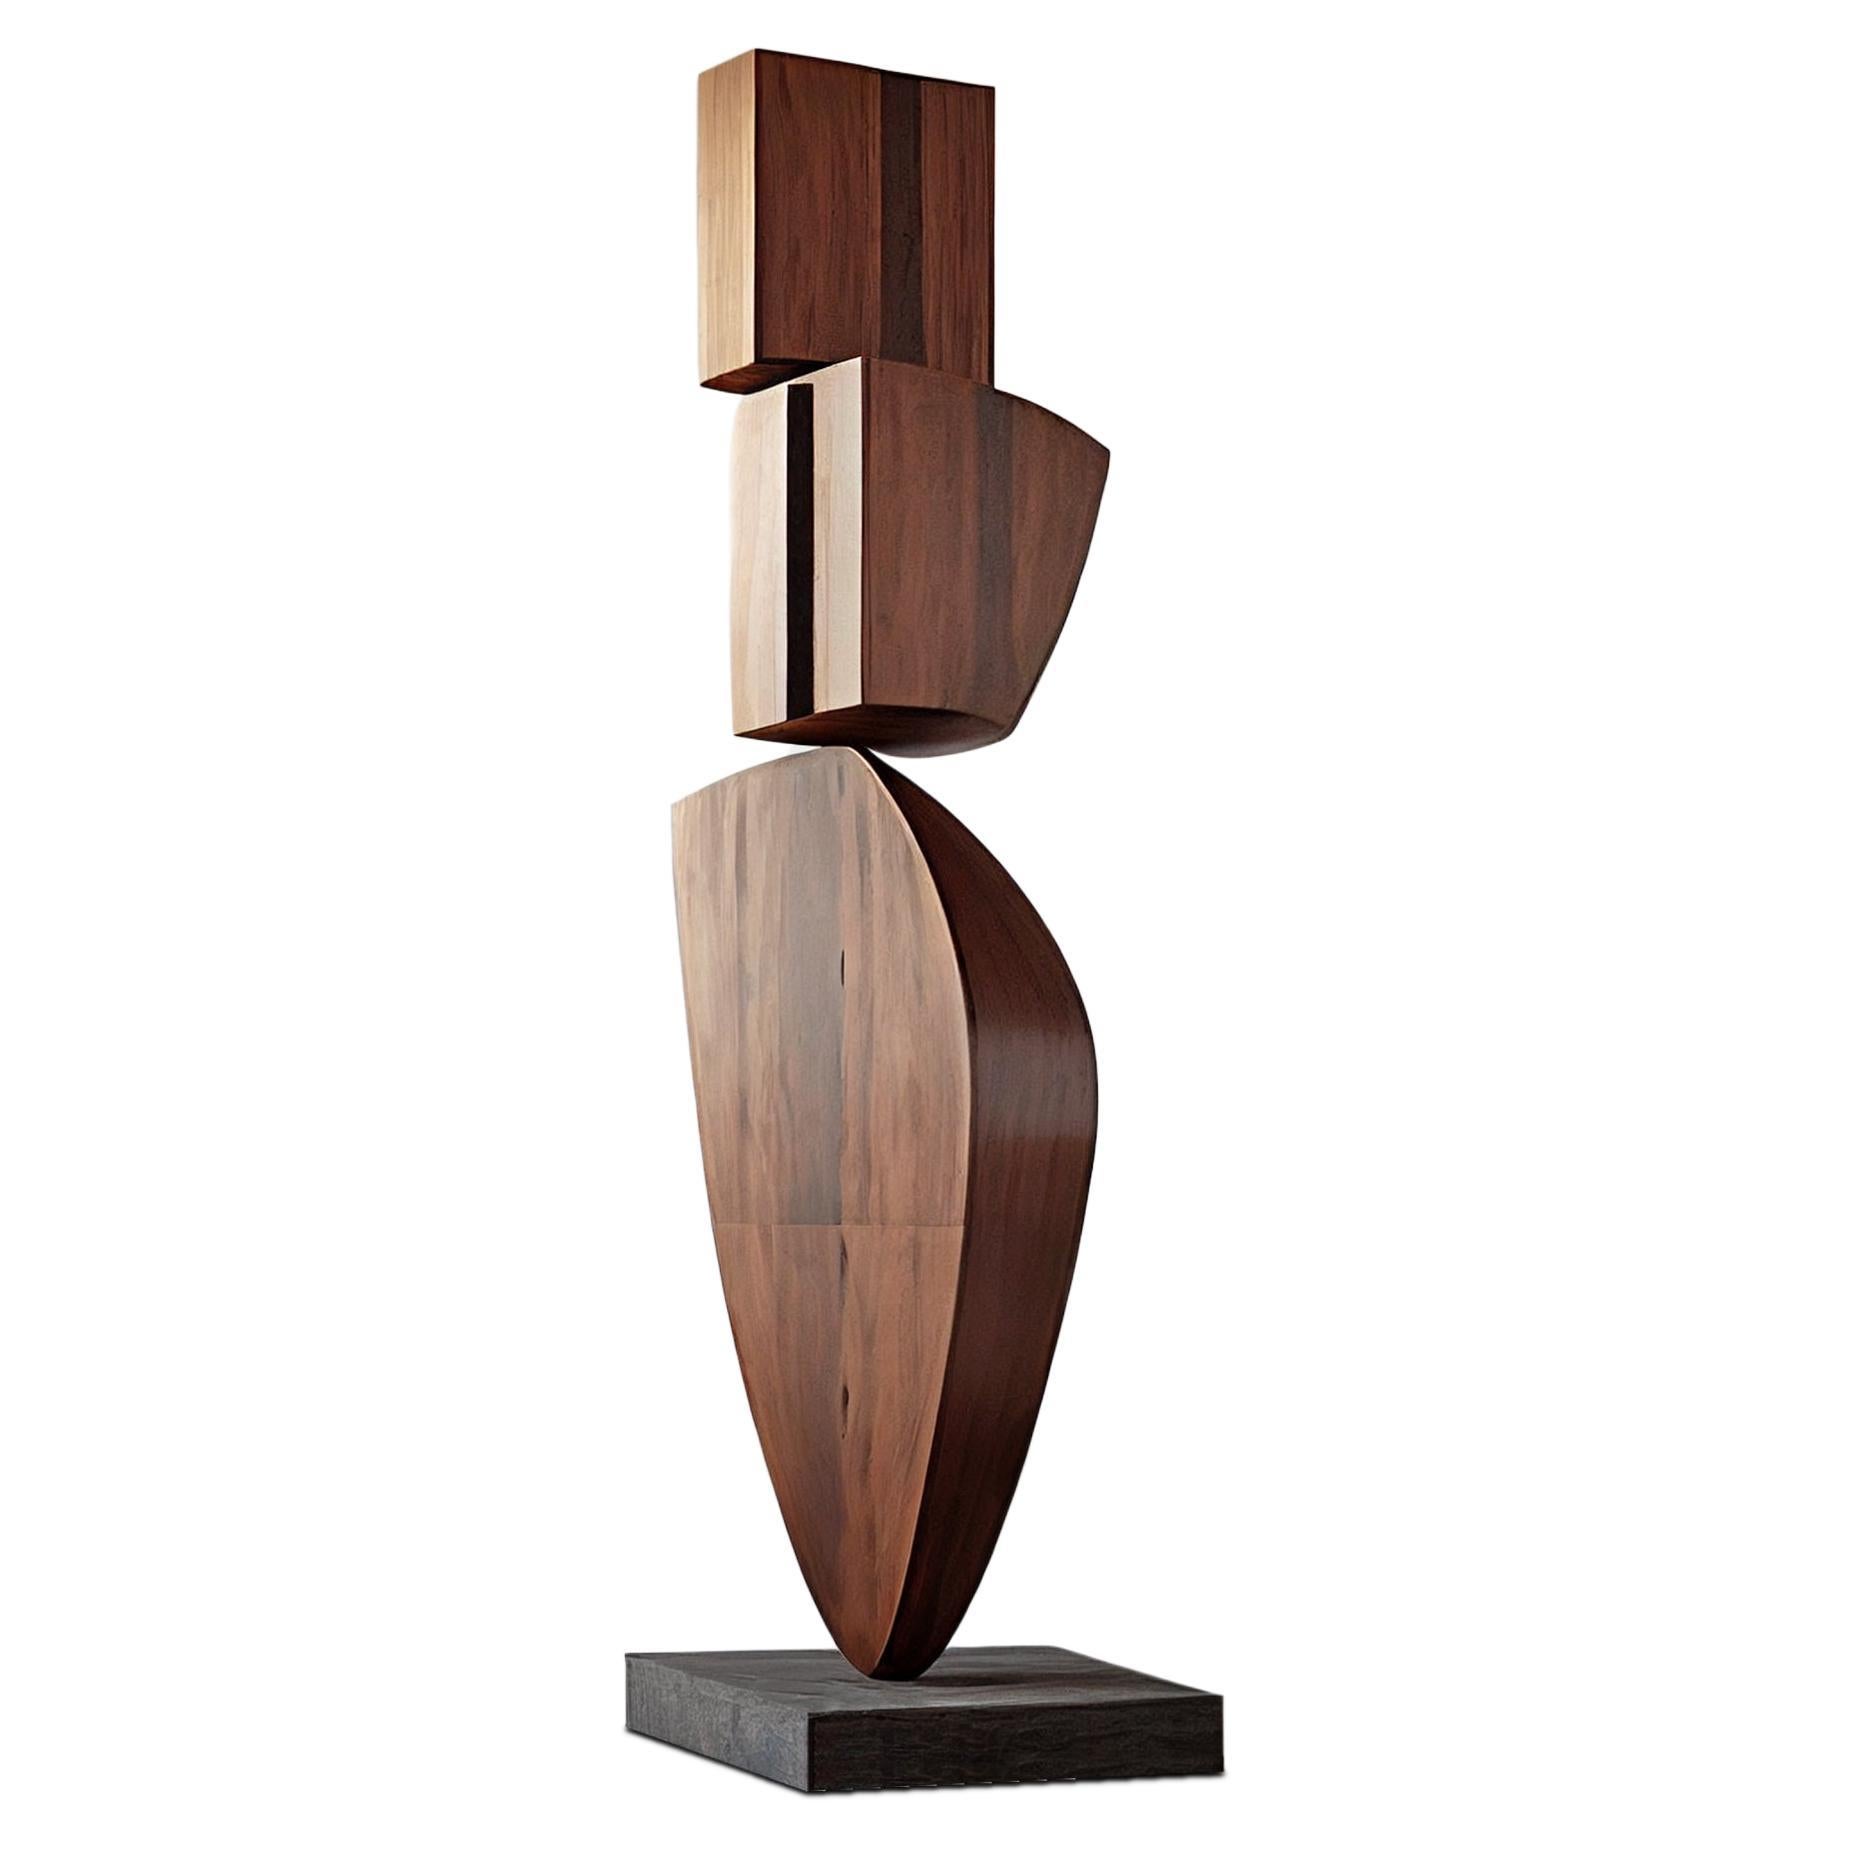 Standing Totem Wood Sculpture, Still Stand No3 by Joel Escalona